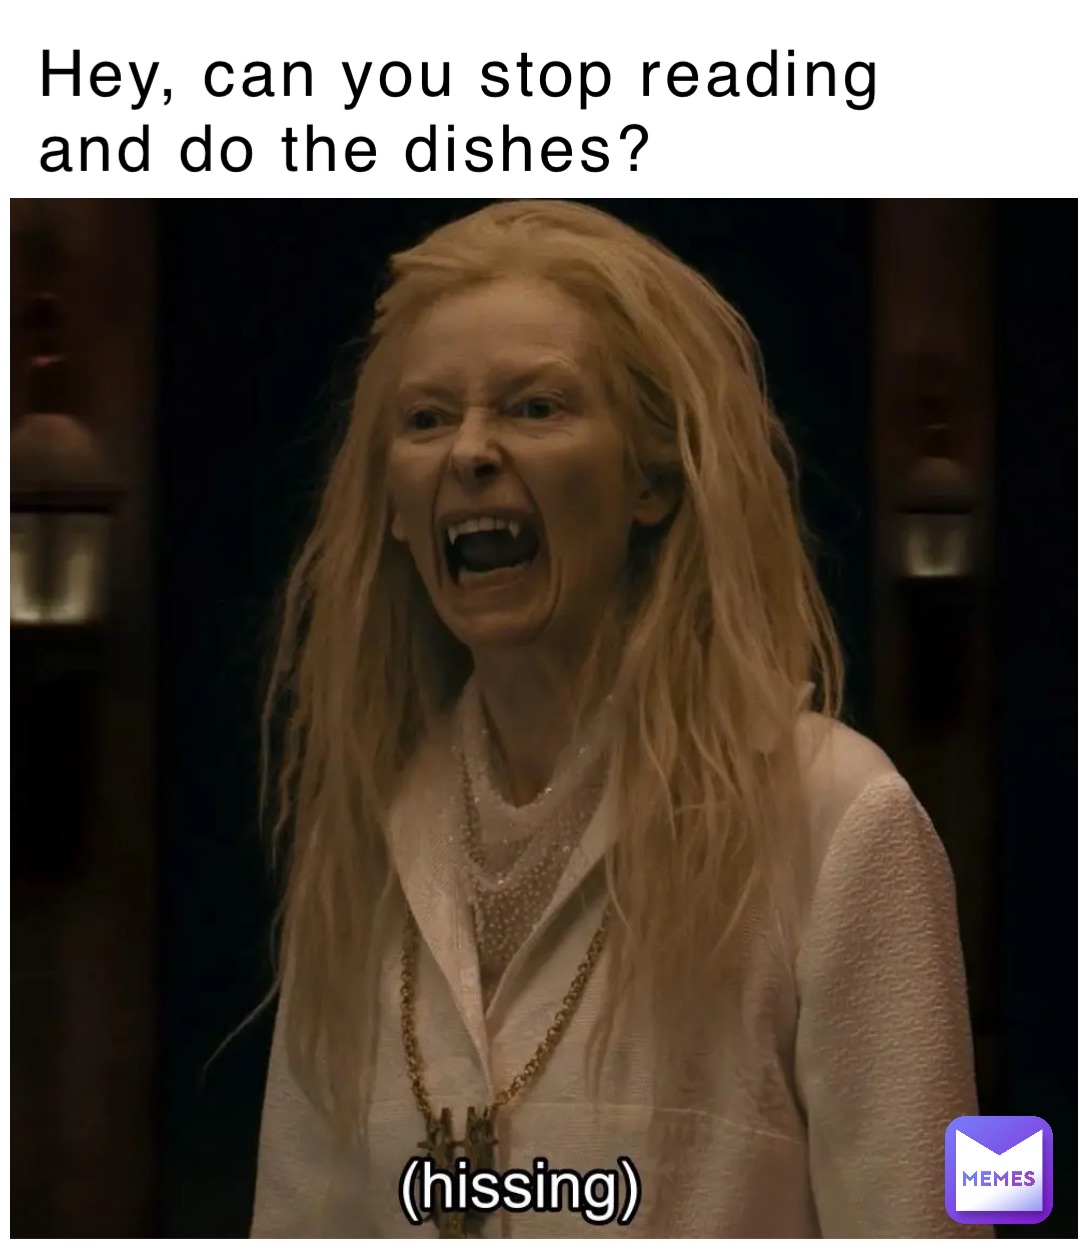 Hey, can you stop reading and do the dishes? Hey, can you stop reading and do the dishes?